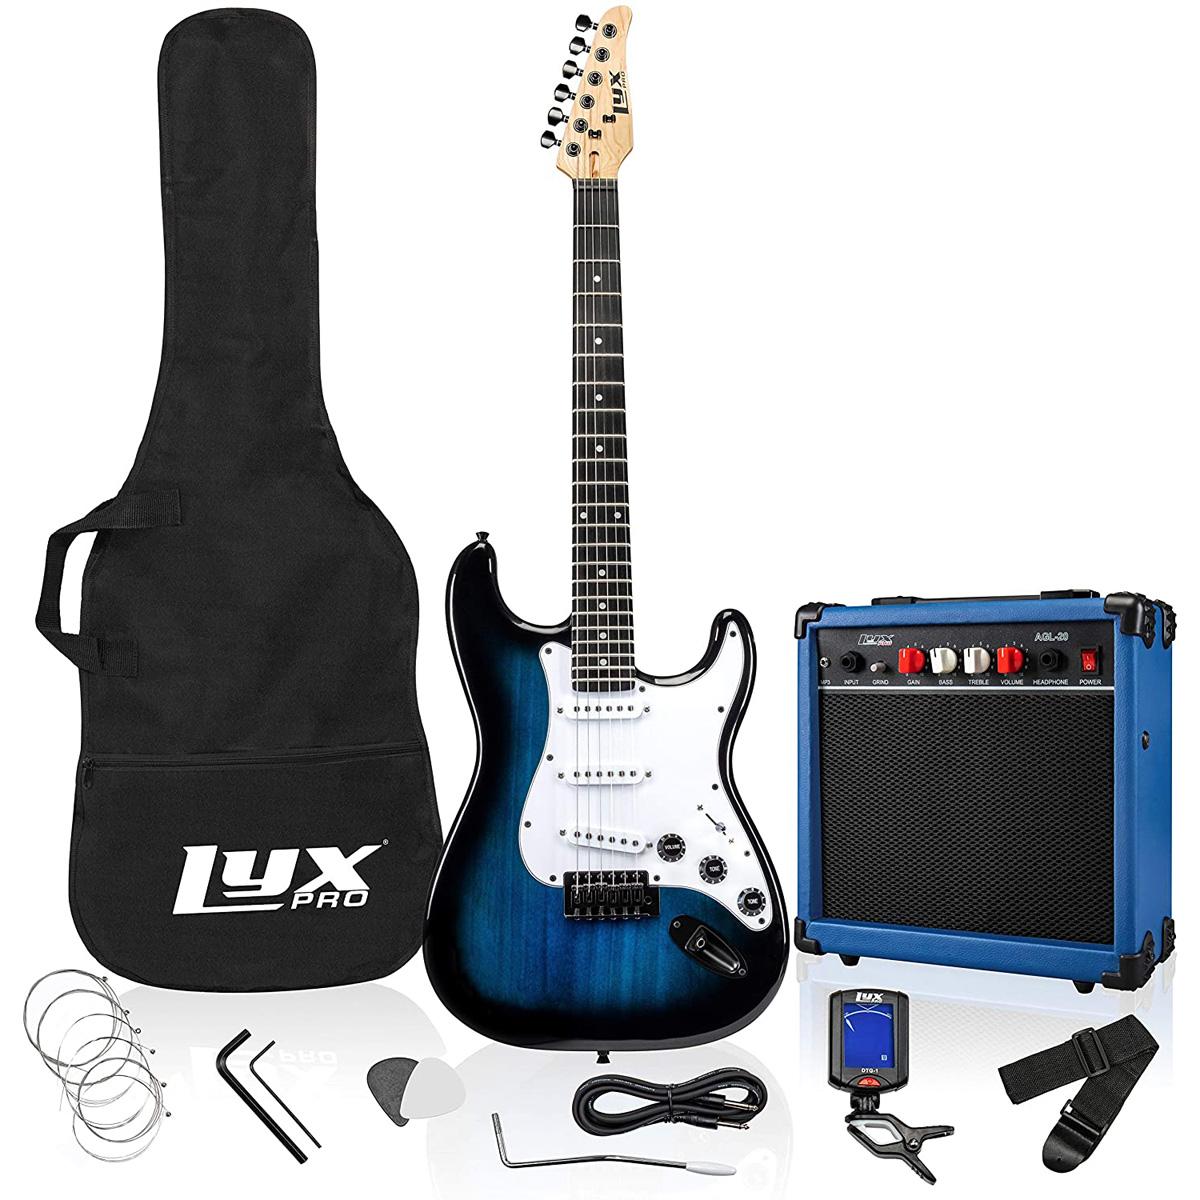 LyxPro 39in Electric Guitar Kit Bundle with Amplifier for $124.99 Shipped